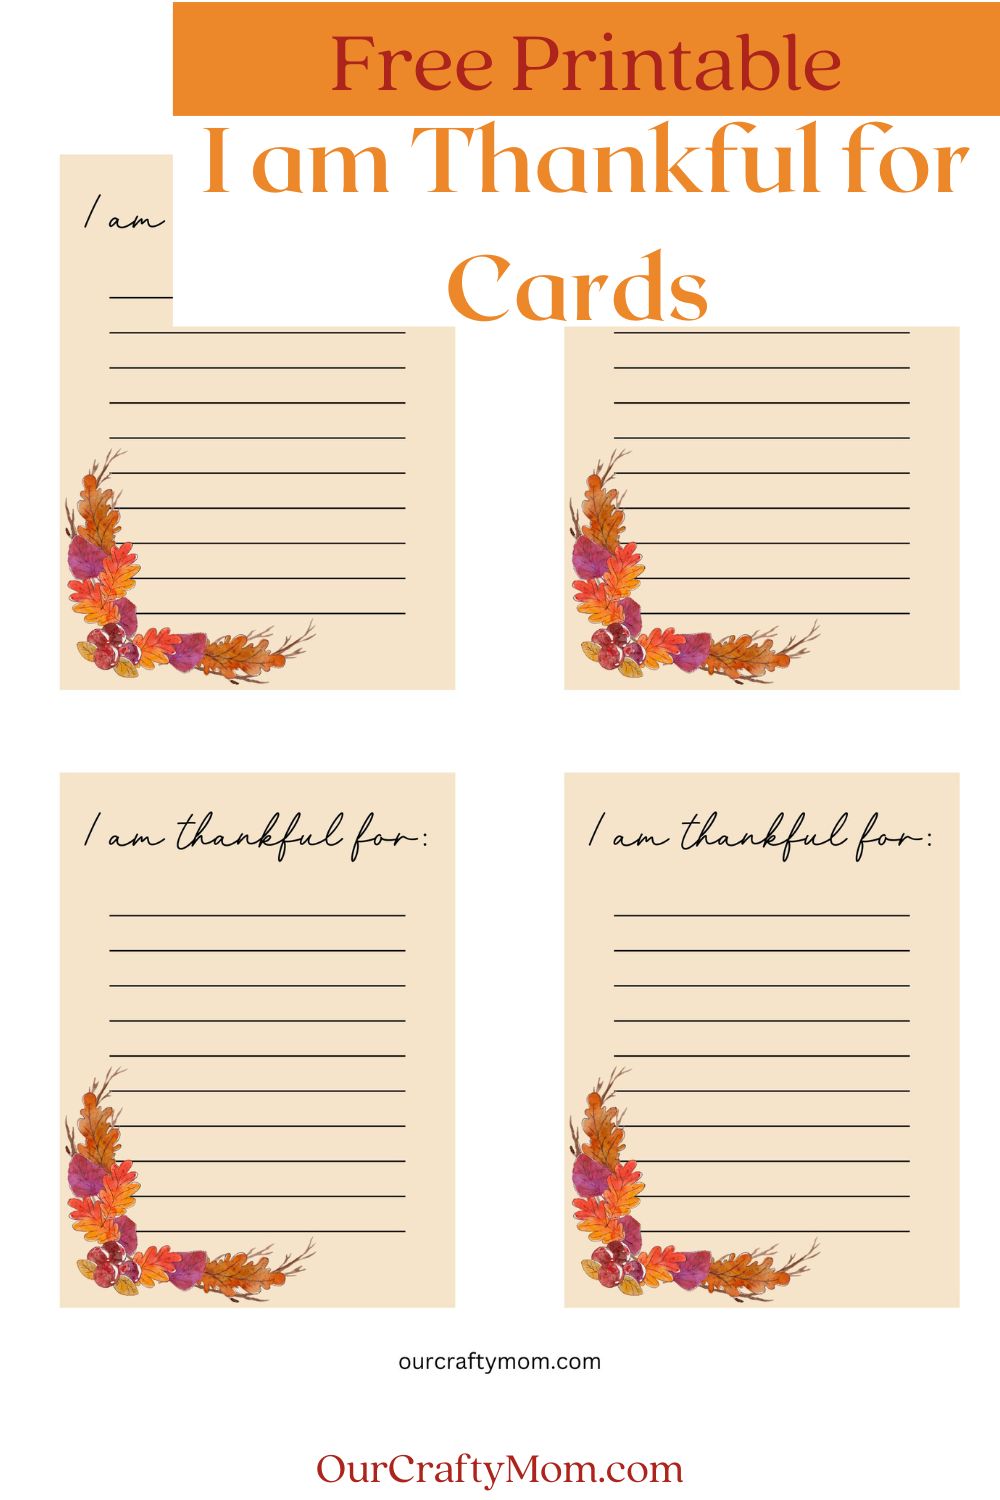 I am thankful for cards